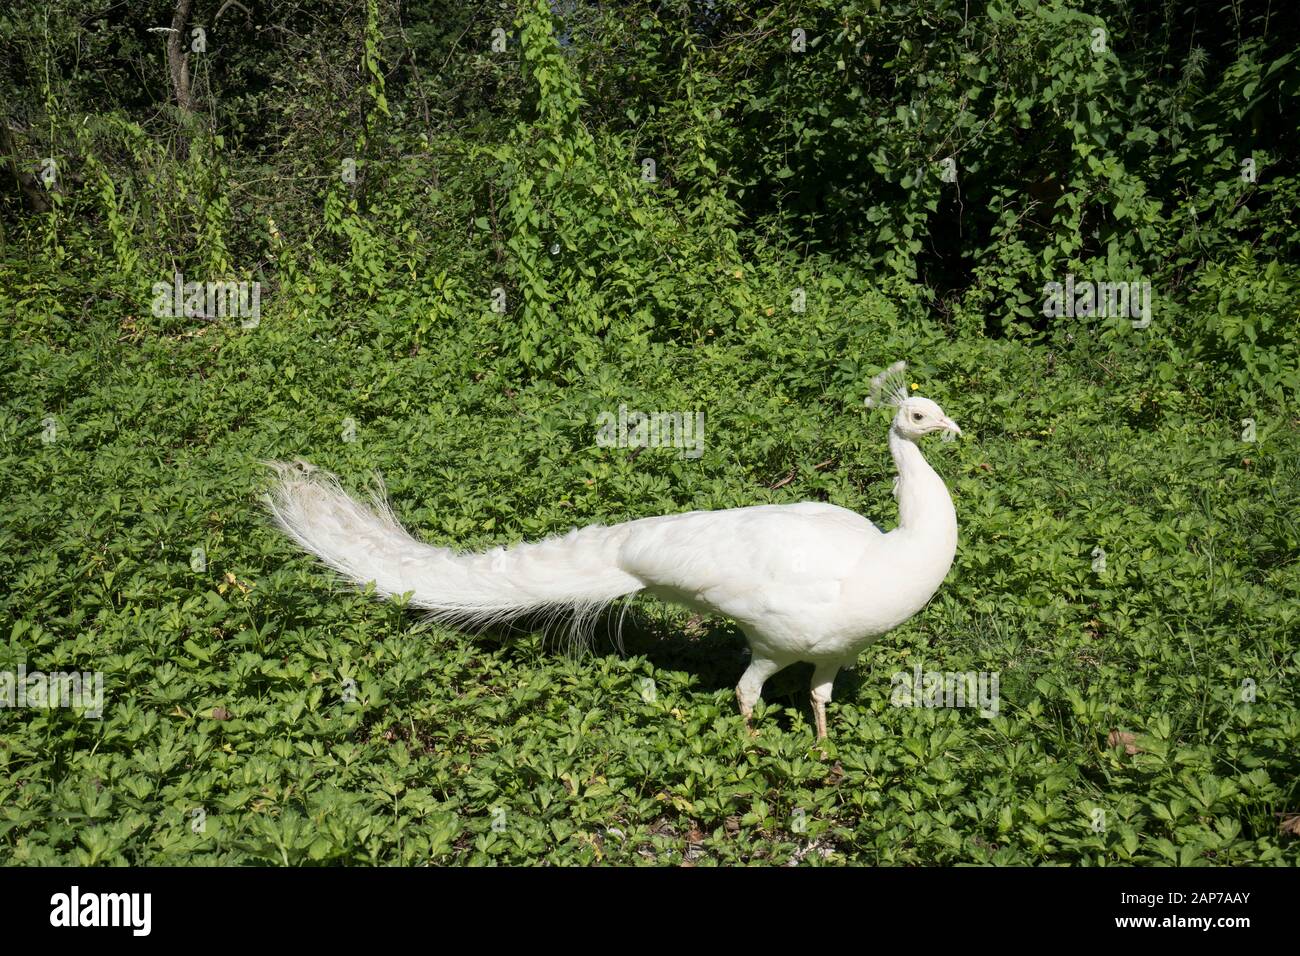 A white peacock in the lush vegetation Stock Photo